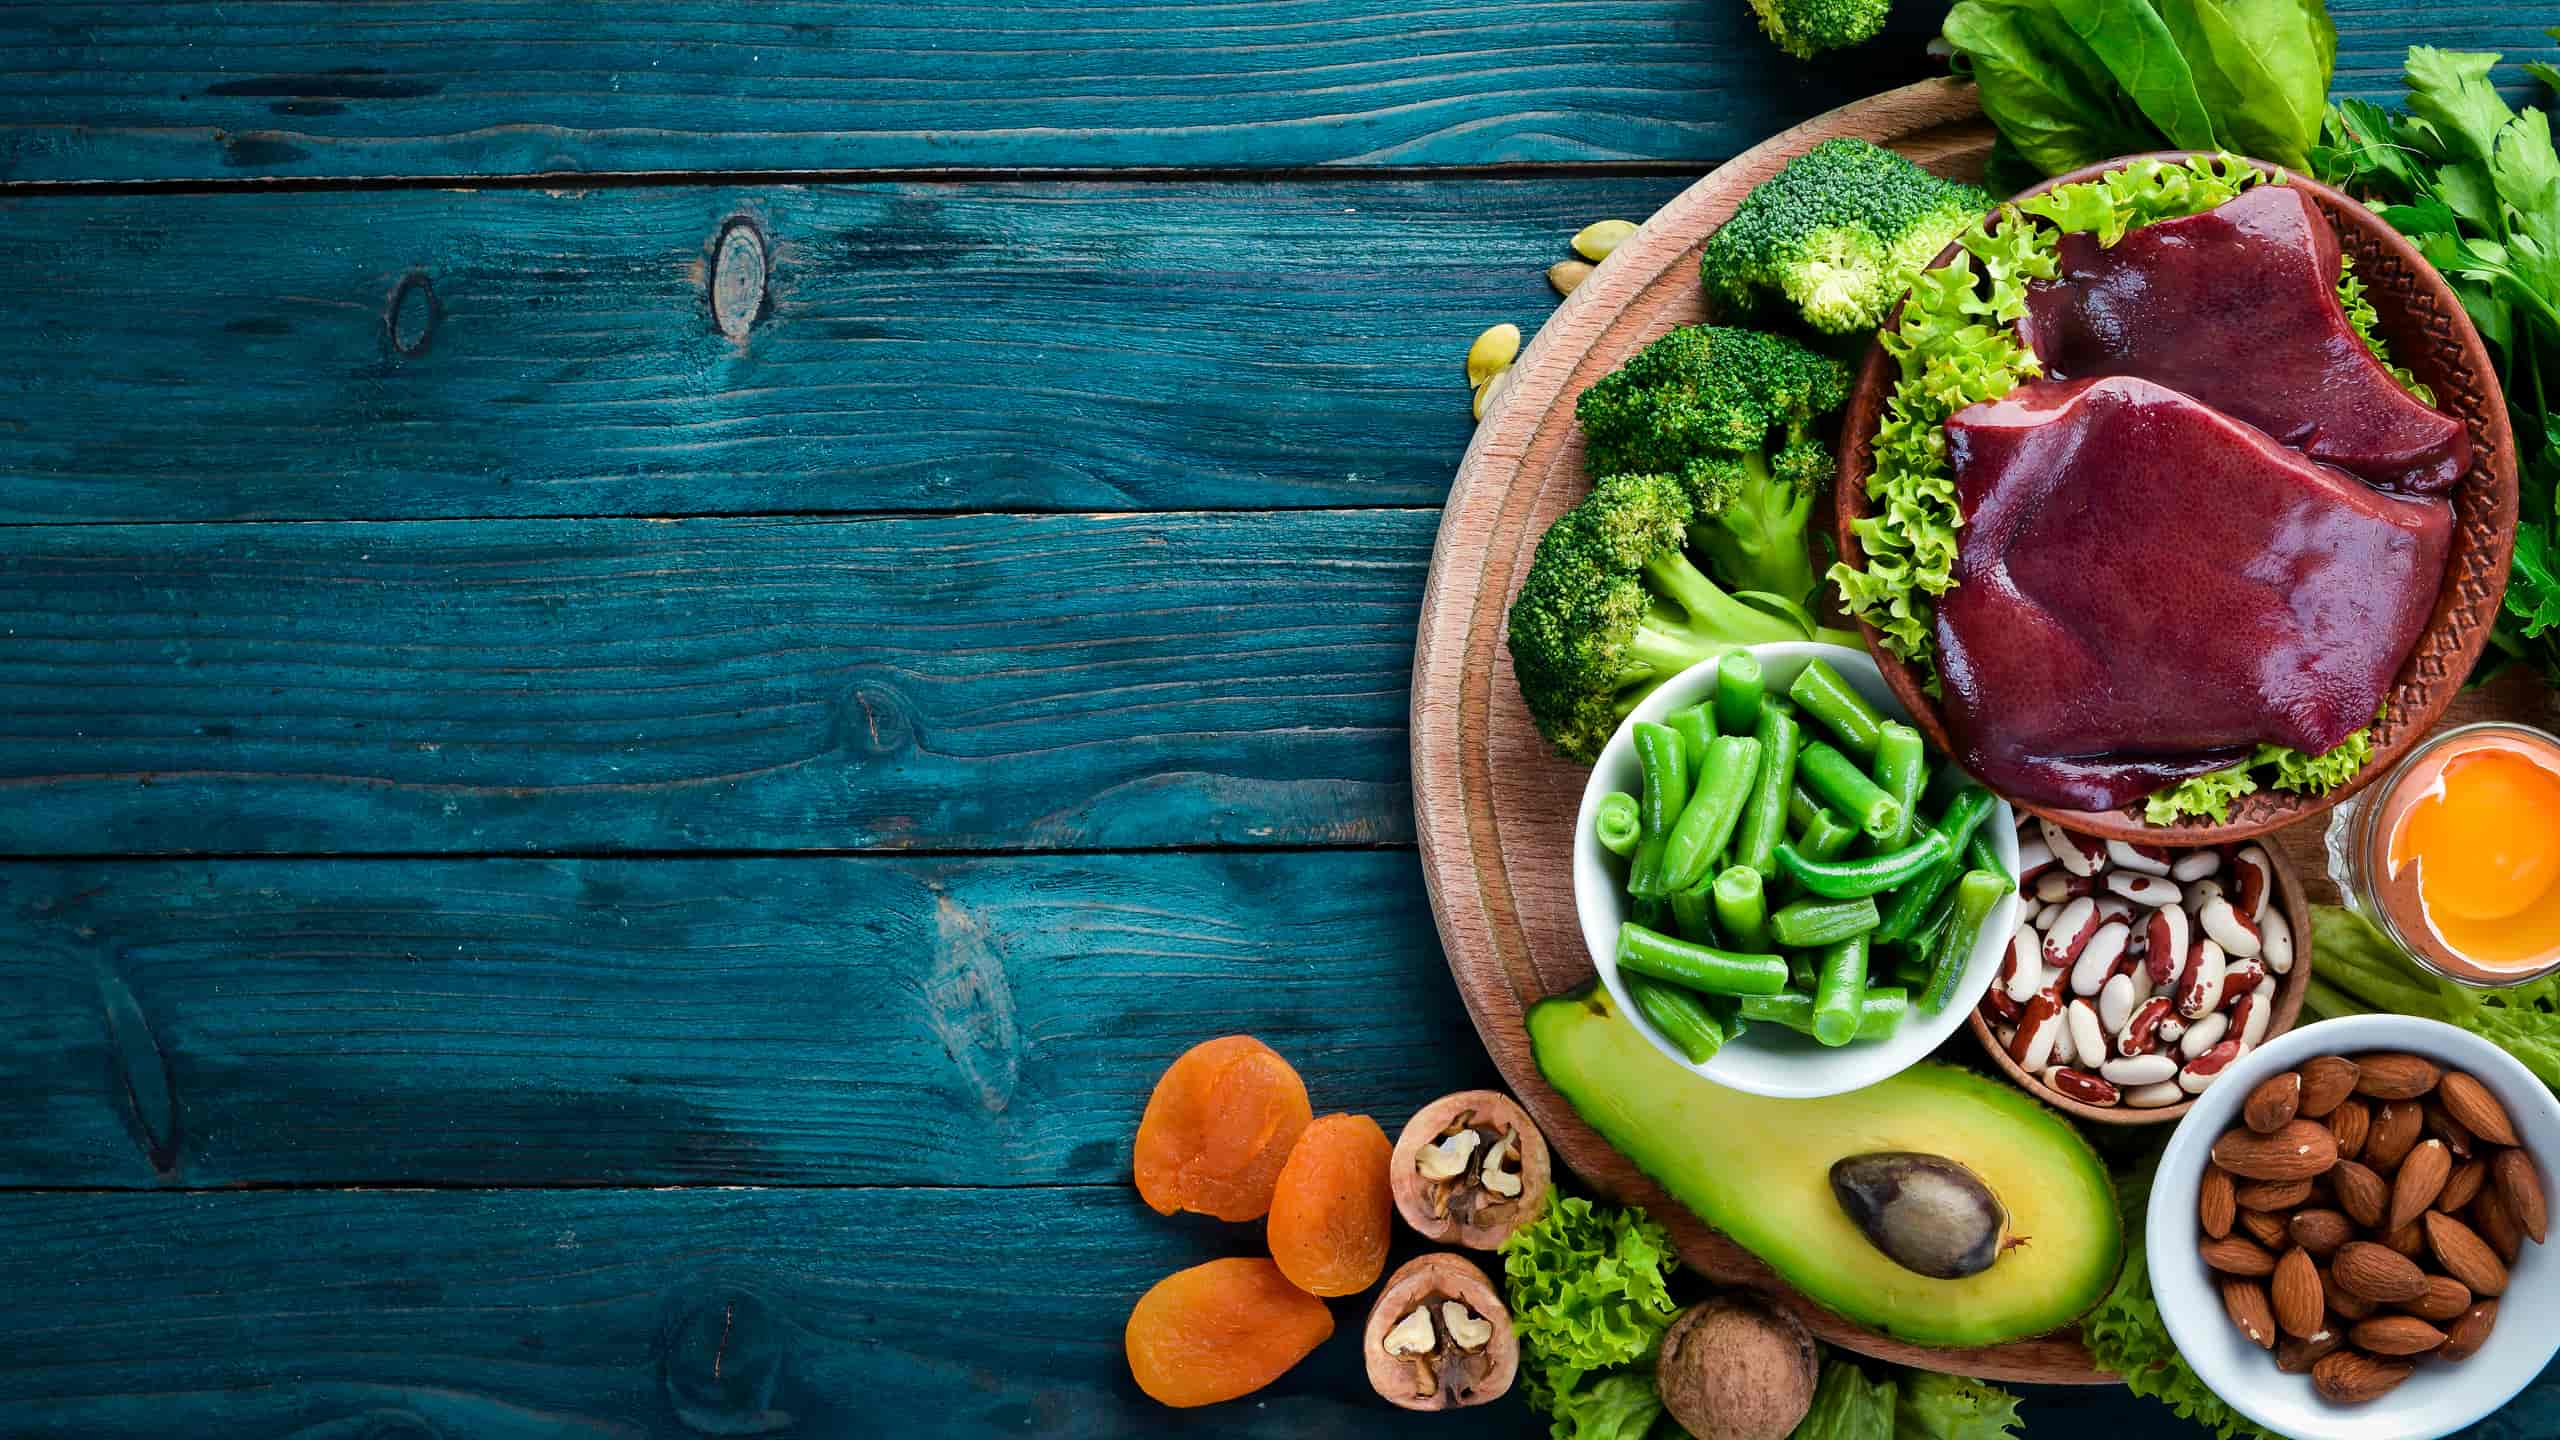 Wooden board with high in iron foods: broccoli, green beans, liver, beans, almonds, avocado, egg, walnuts and apricots.